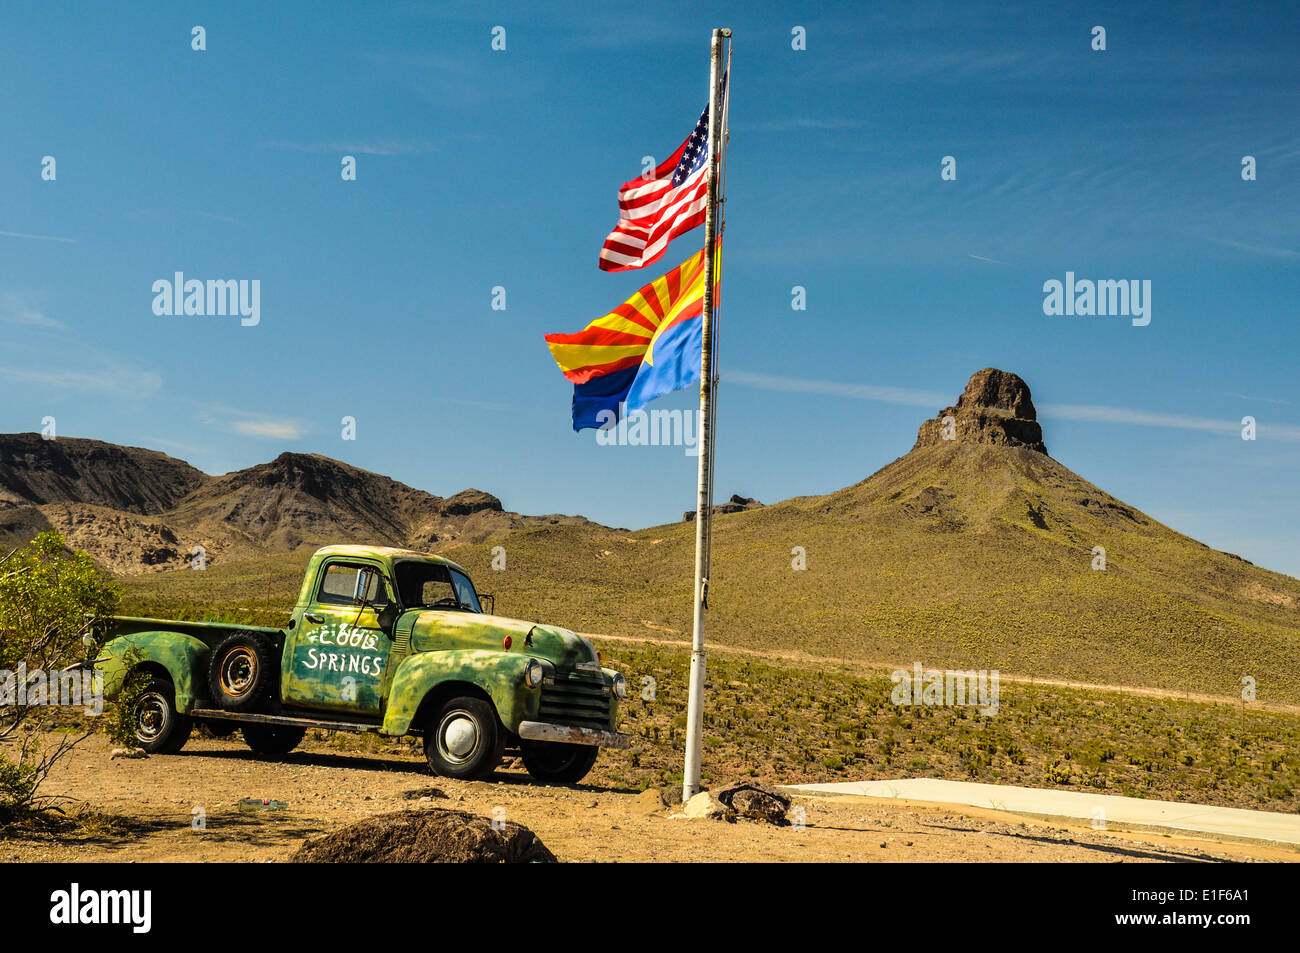 Vintage car on Route 66 in the Mojave desert with national and state flags Stock Photo